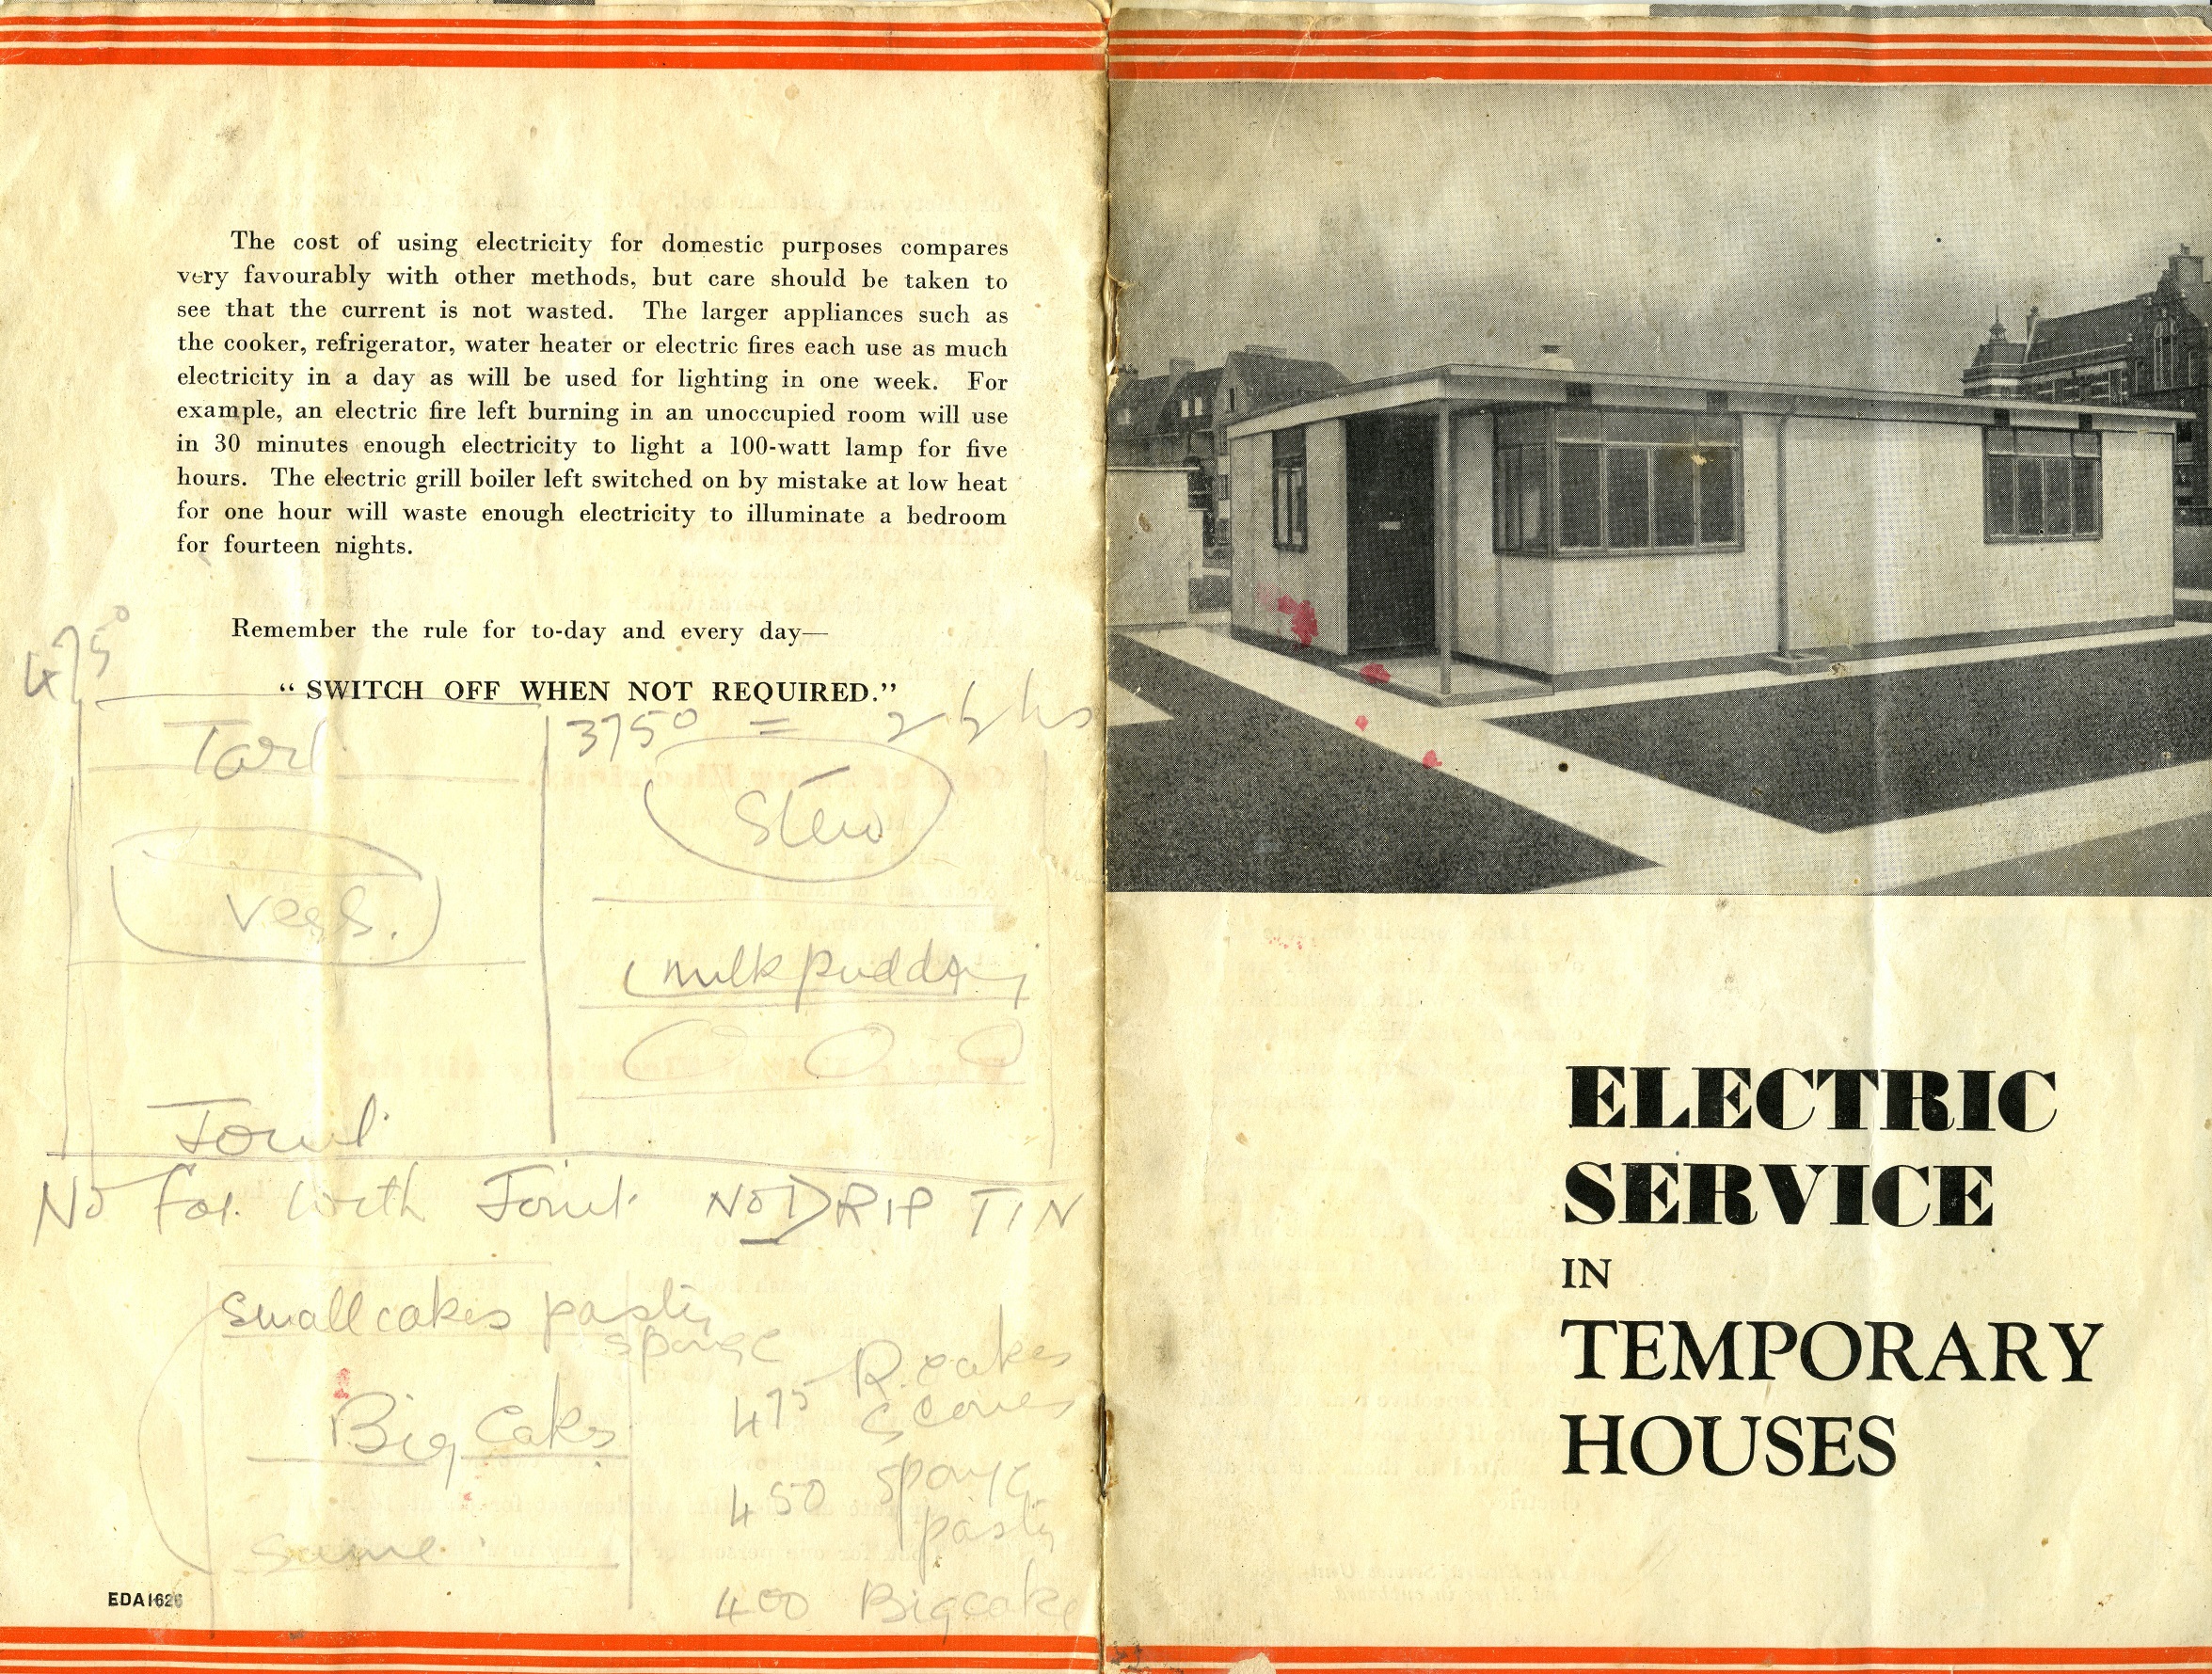 Electric Service in Temporary Houses